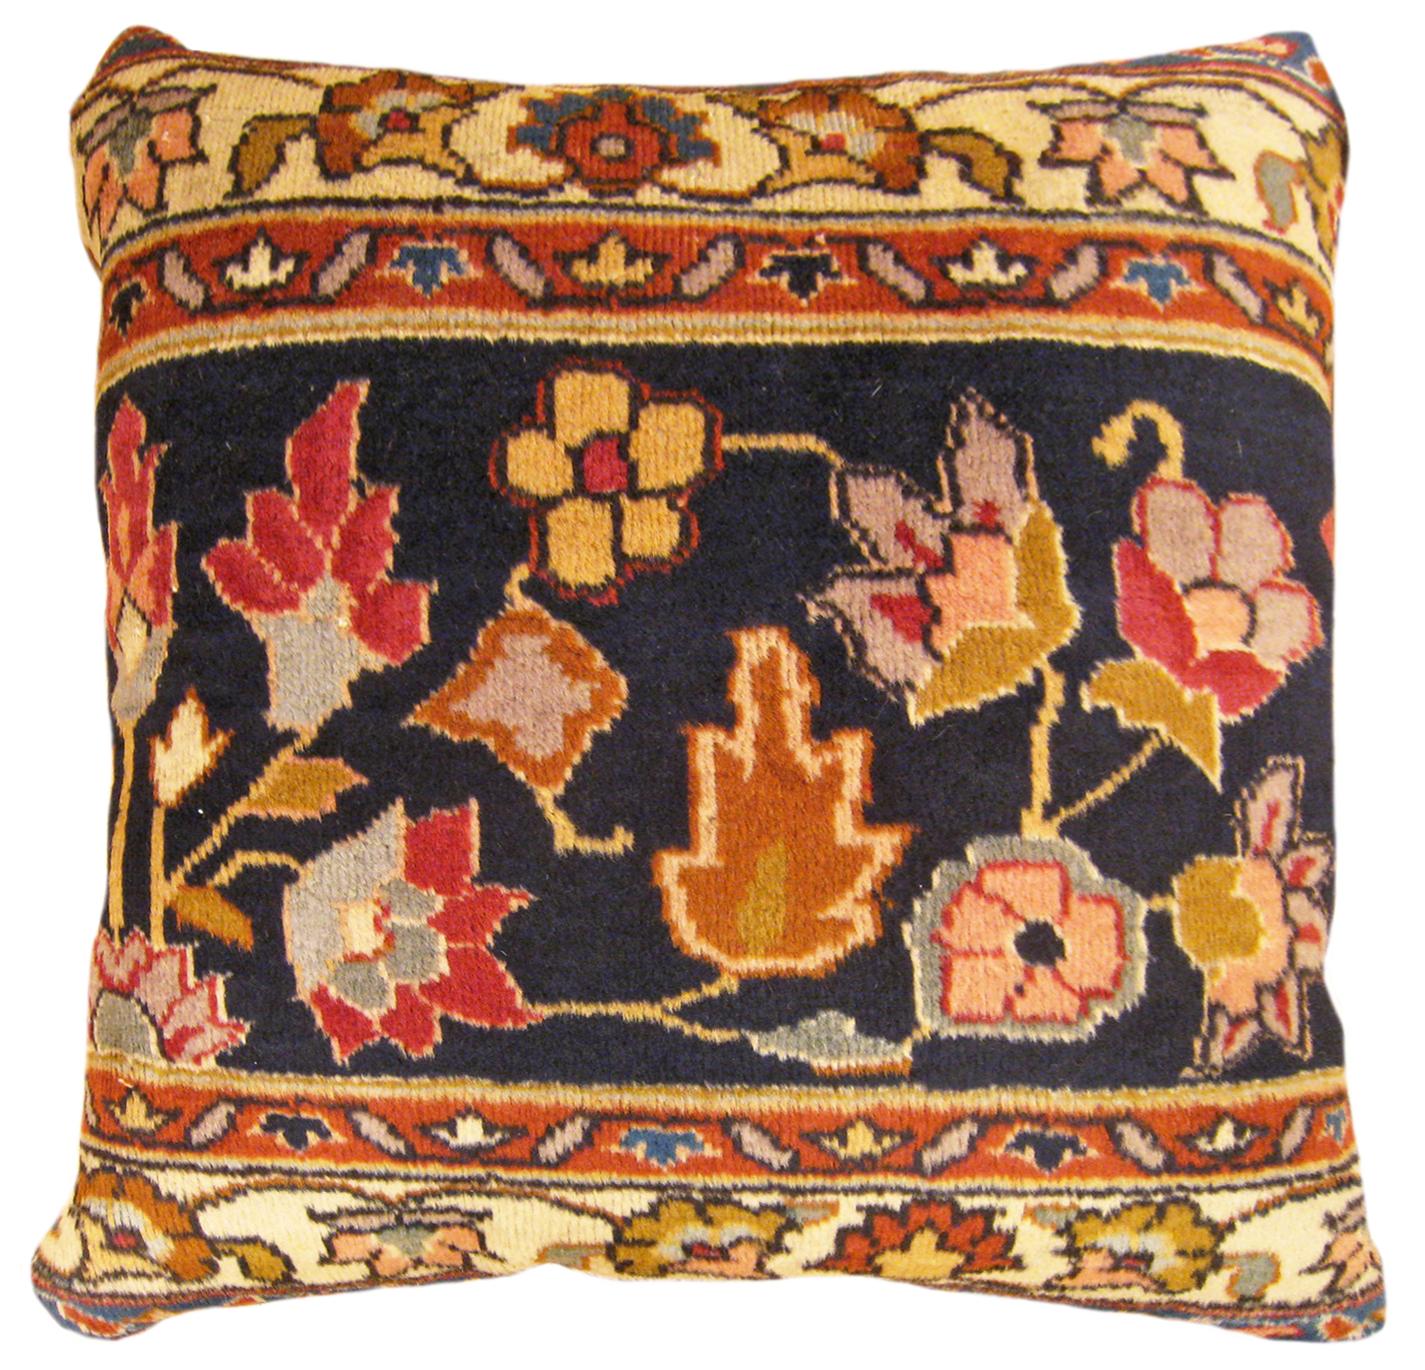  Decorative Antique Indian Agra Rug Pillow with Floral Elements Allover For Sale